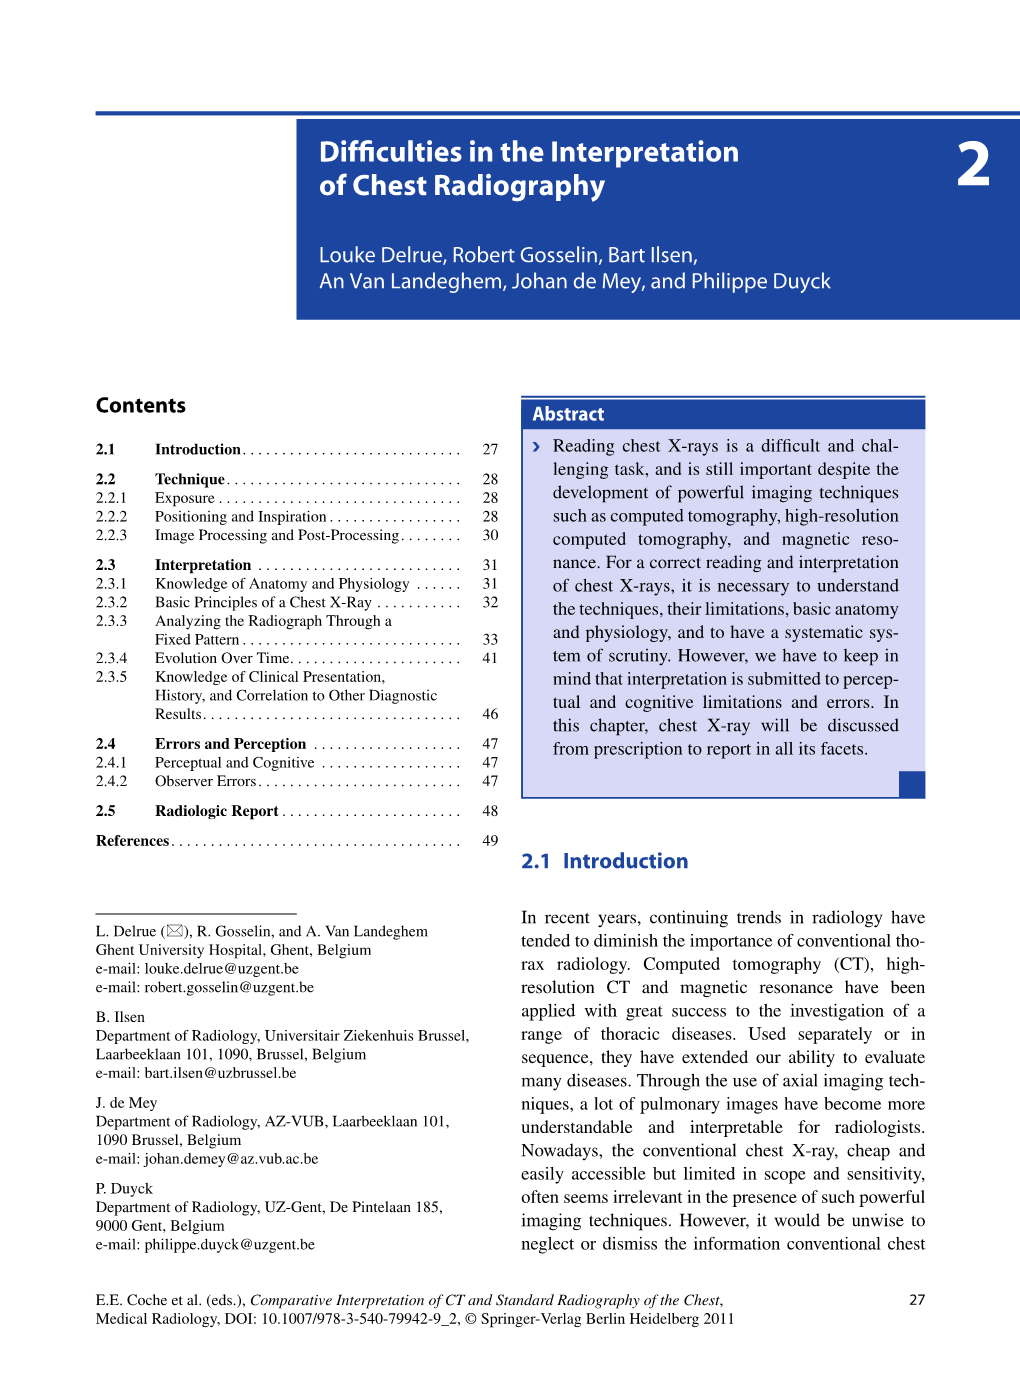 Difficulties in the Interpretation of Chest Radiography 2